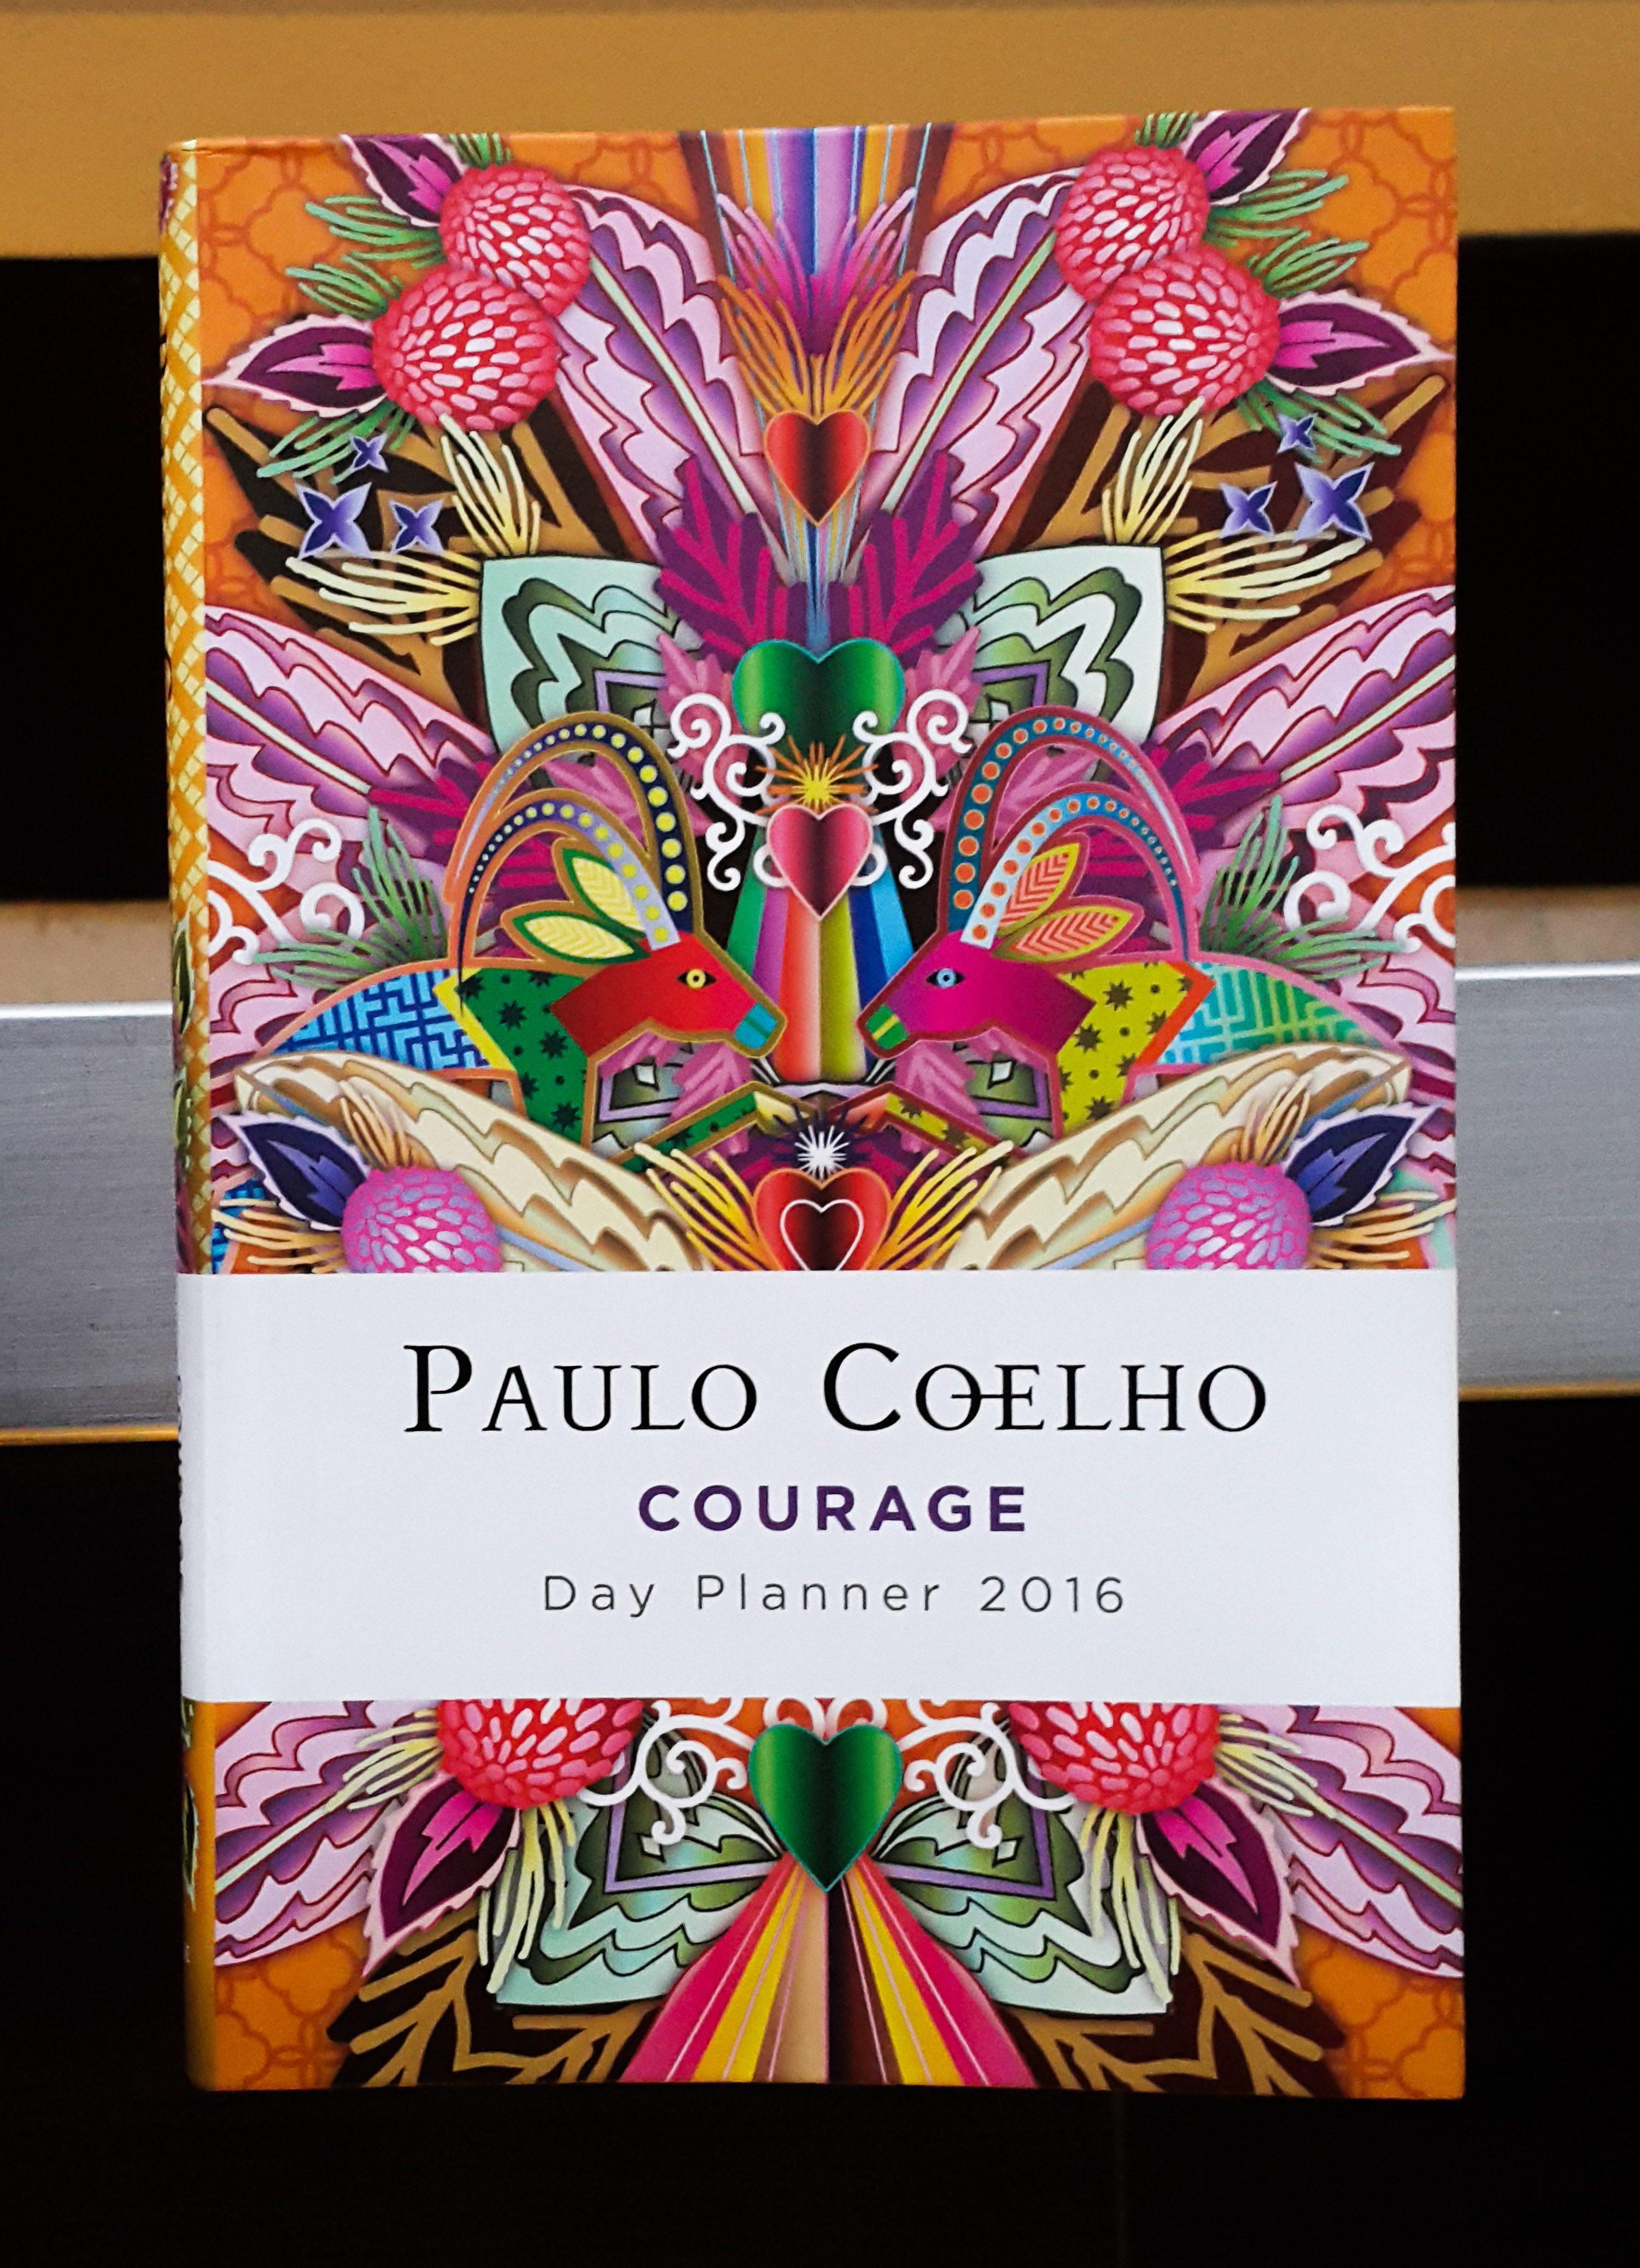 Paulo Coelho 'Courage' planner, P496 at Fully Booked. Photo by Wyatt Ong/Rappler  